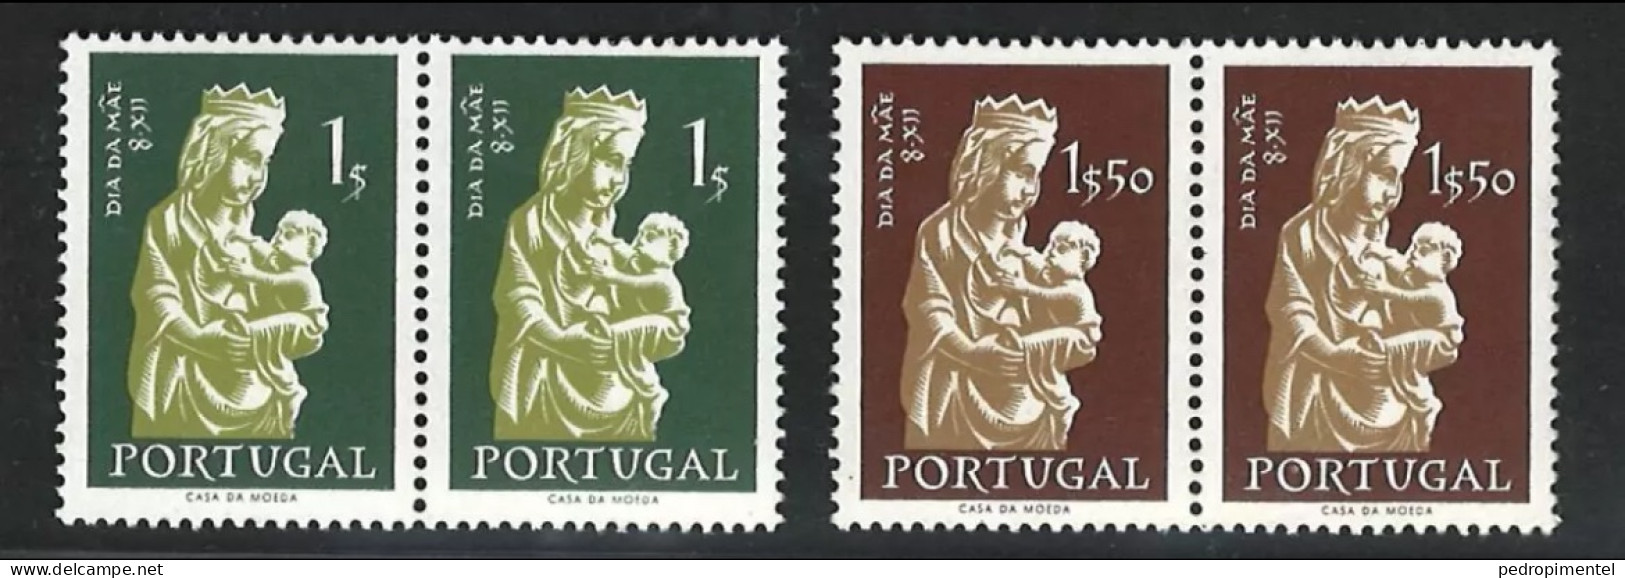 Portugal Stamps 1956 "Mothers Day" Condition MNH #825-826 (Pair) - Nuevos